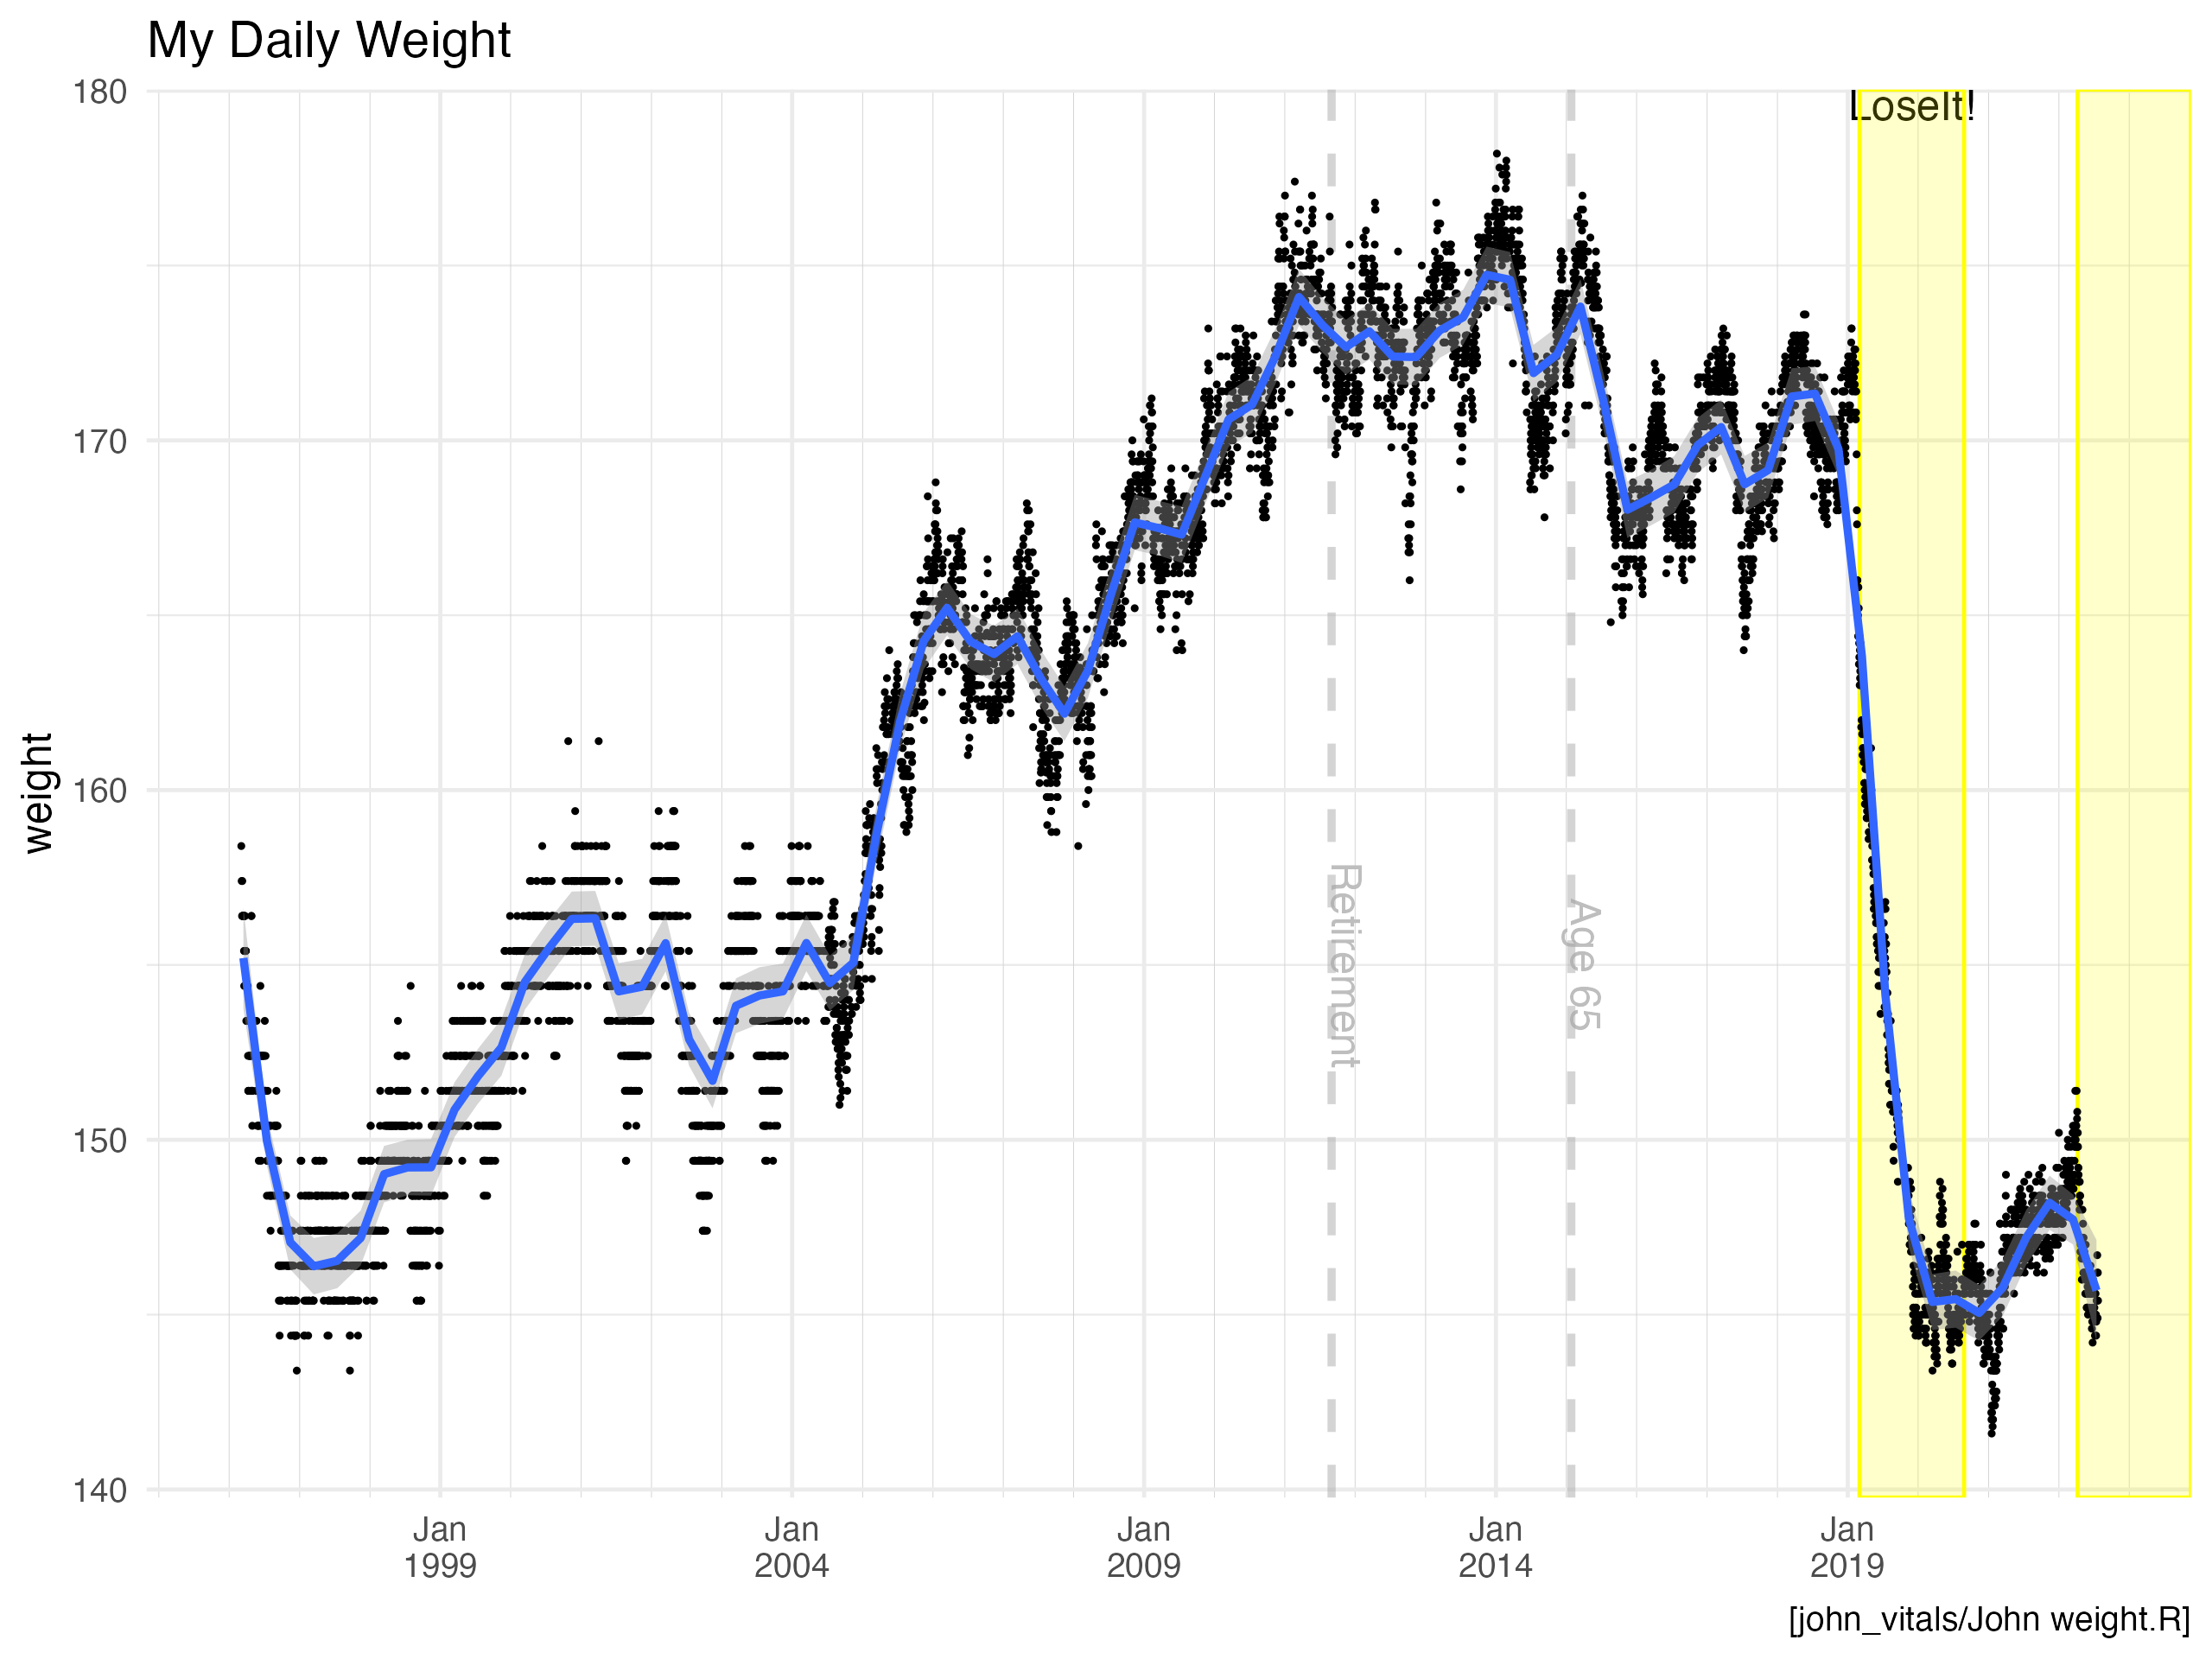 Plot showing daily weight with periods during use of LoseIt to count calories hightlighted in yellow.